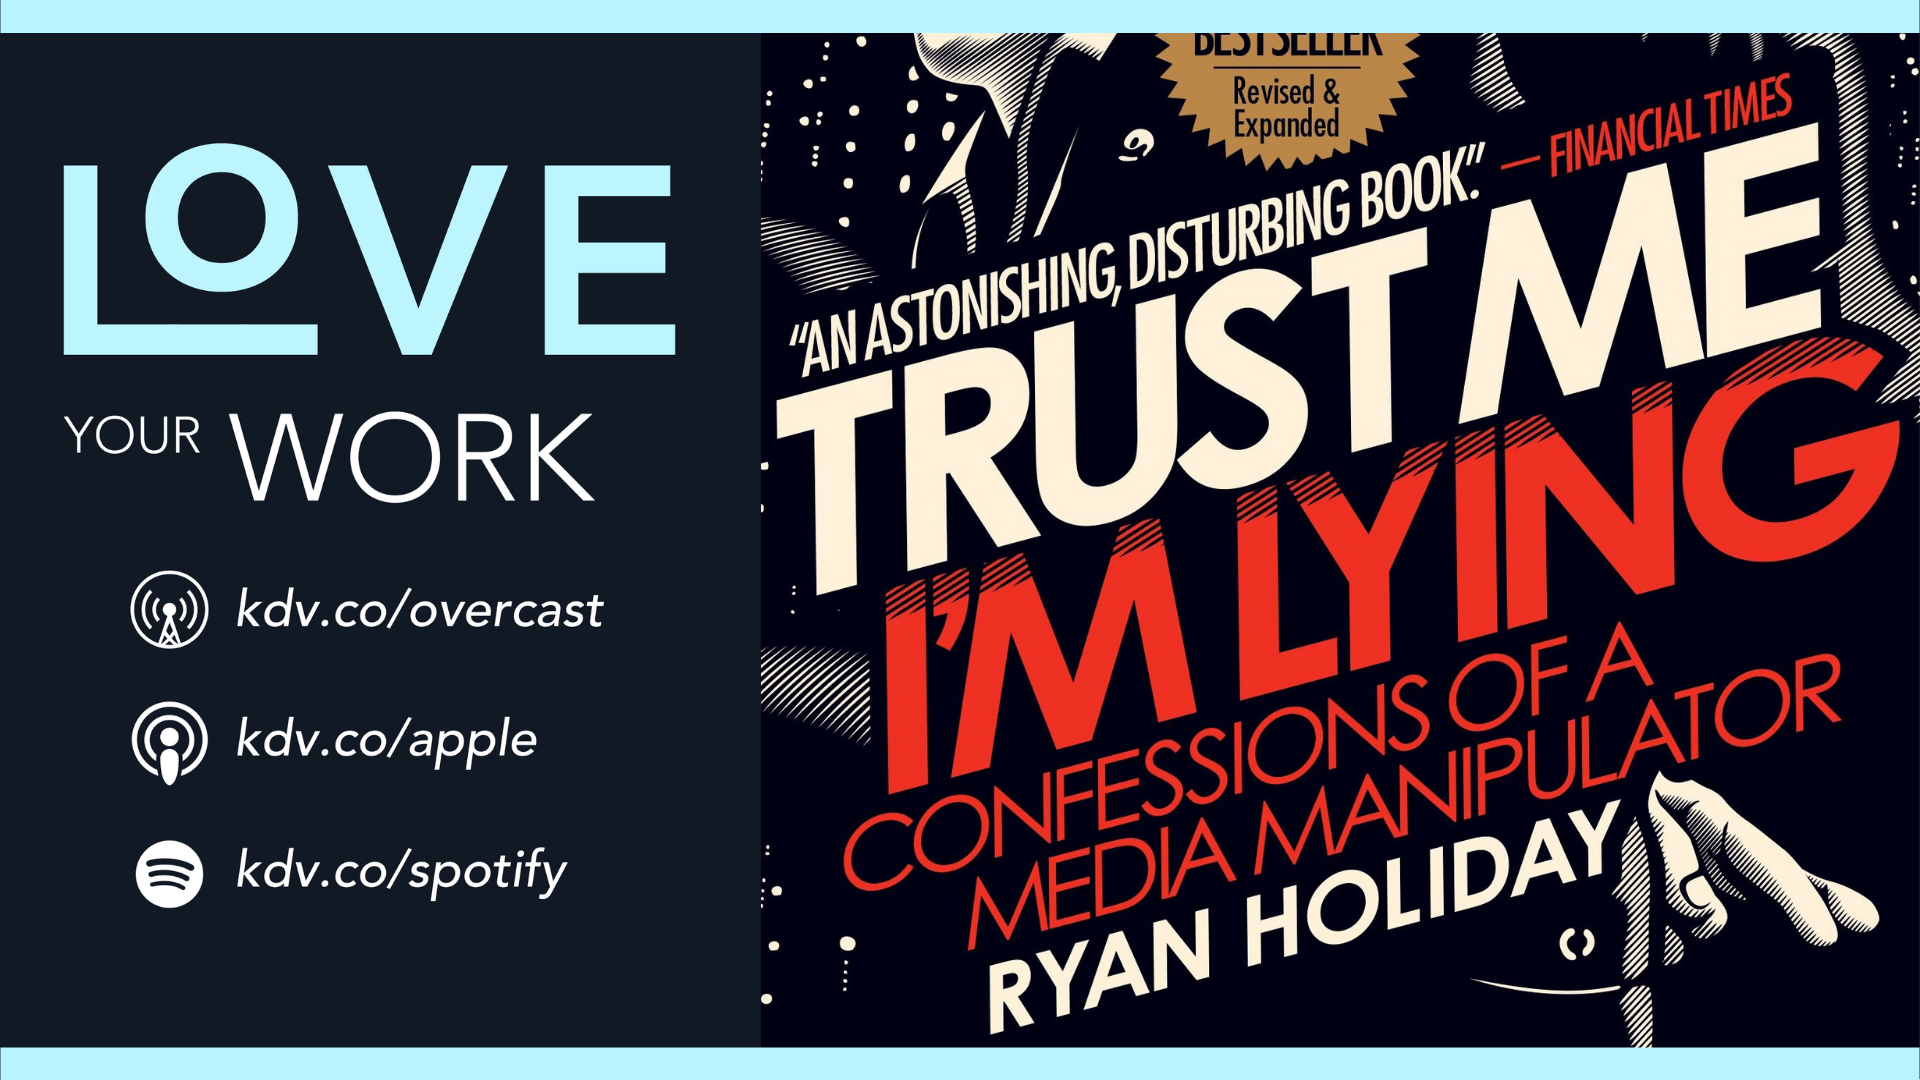 Summary: Trust Me, I’m Lying – by Ryan Holiday – Love Your Work, Episode 277